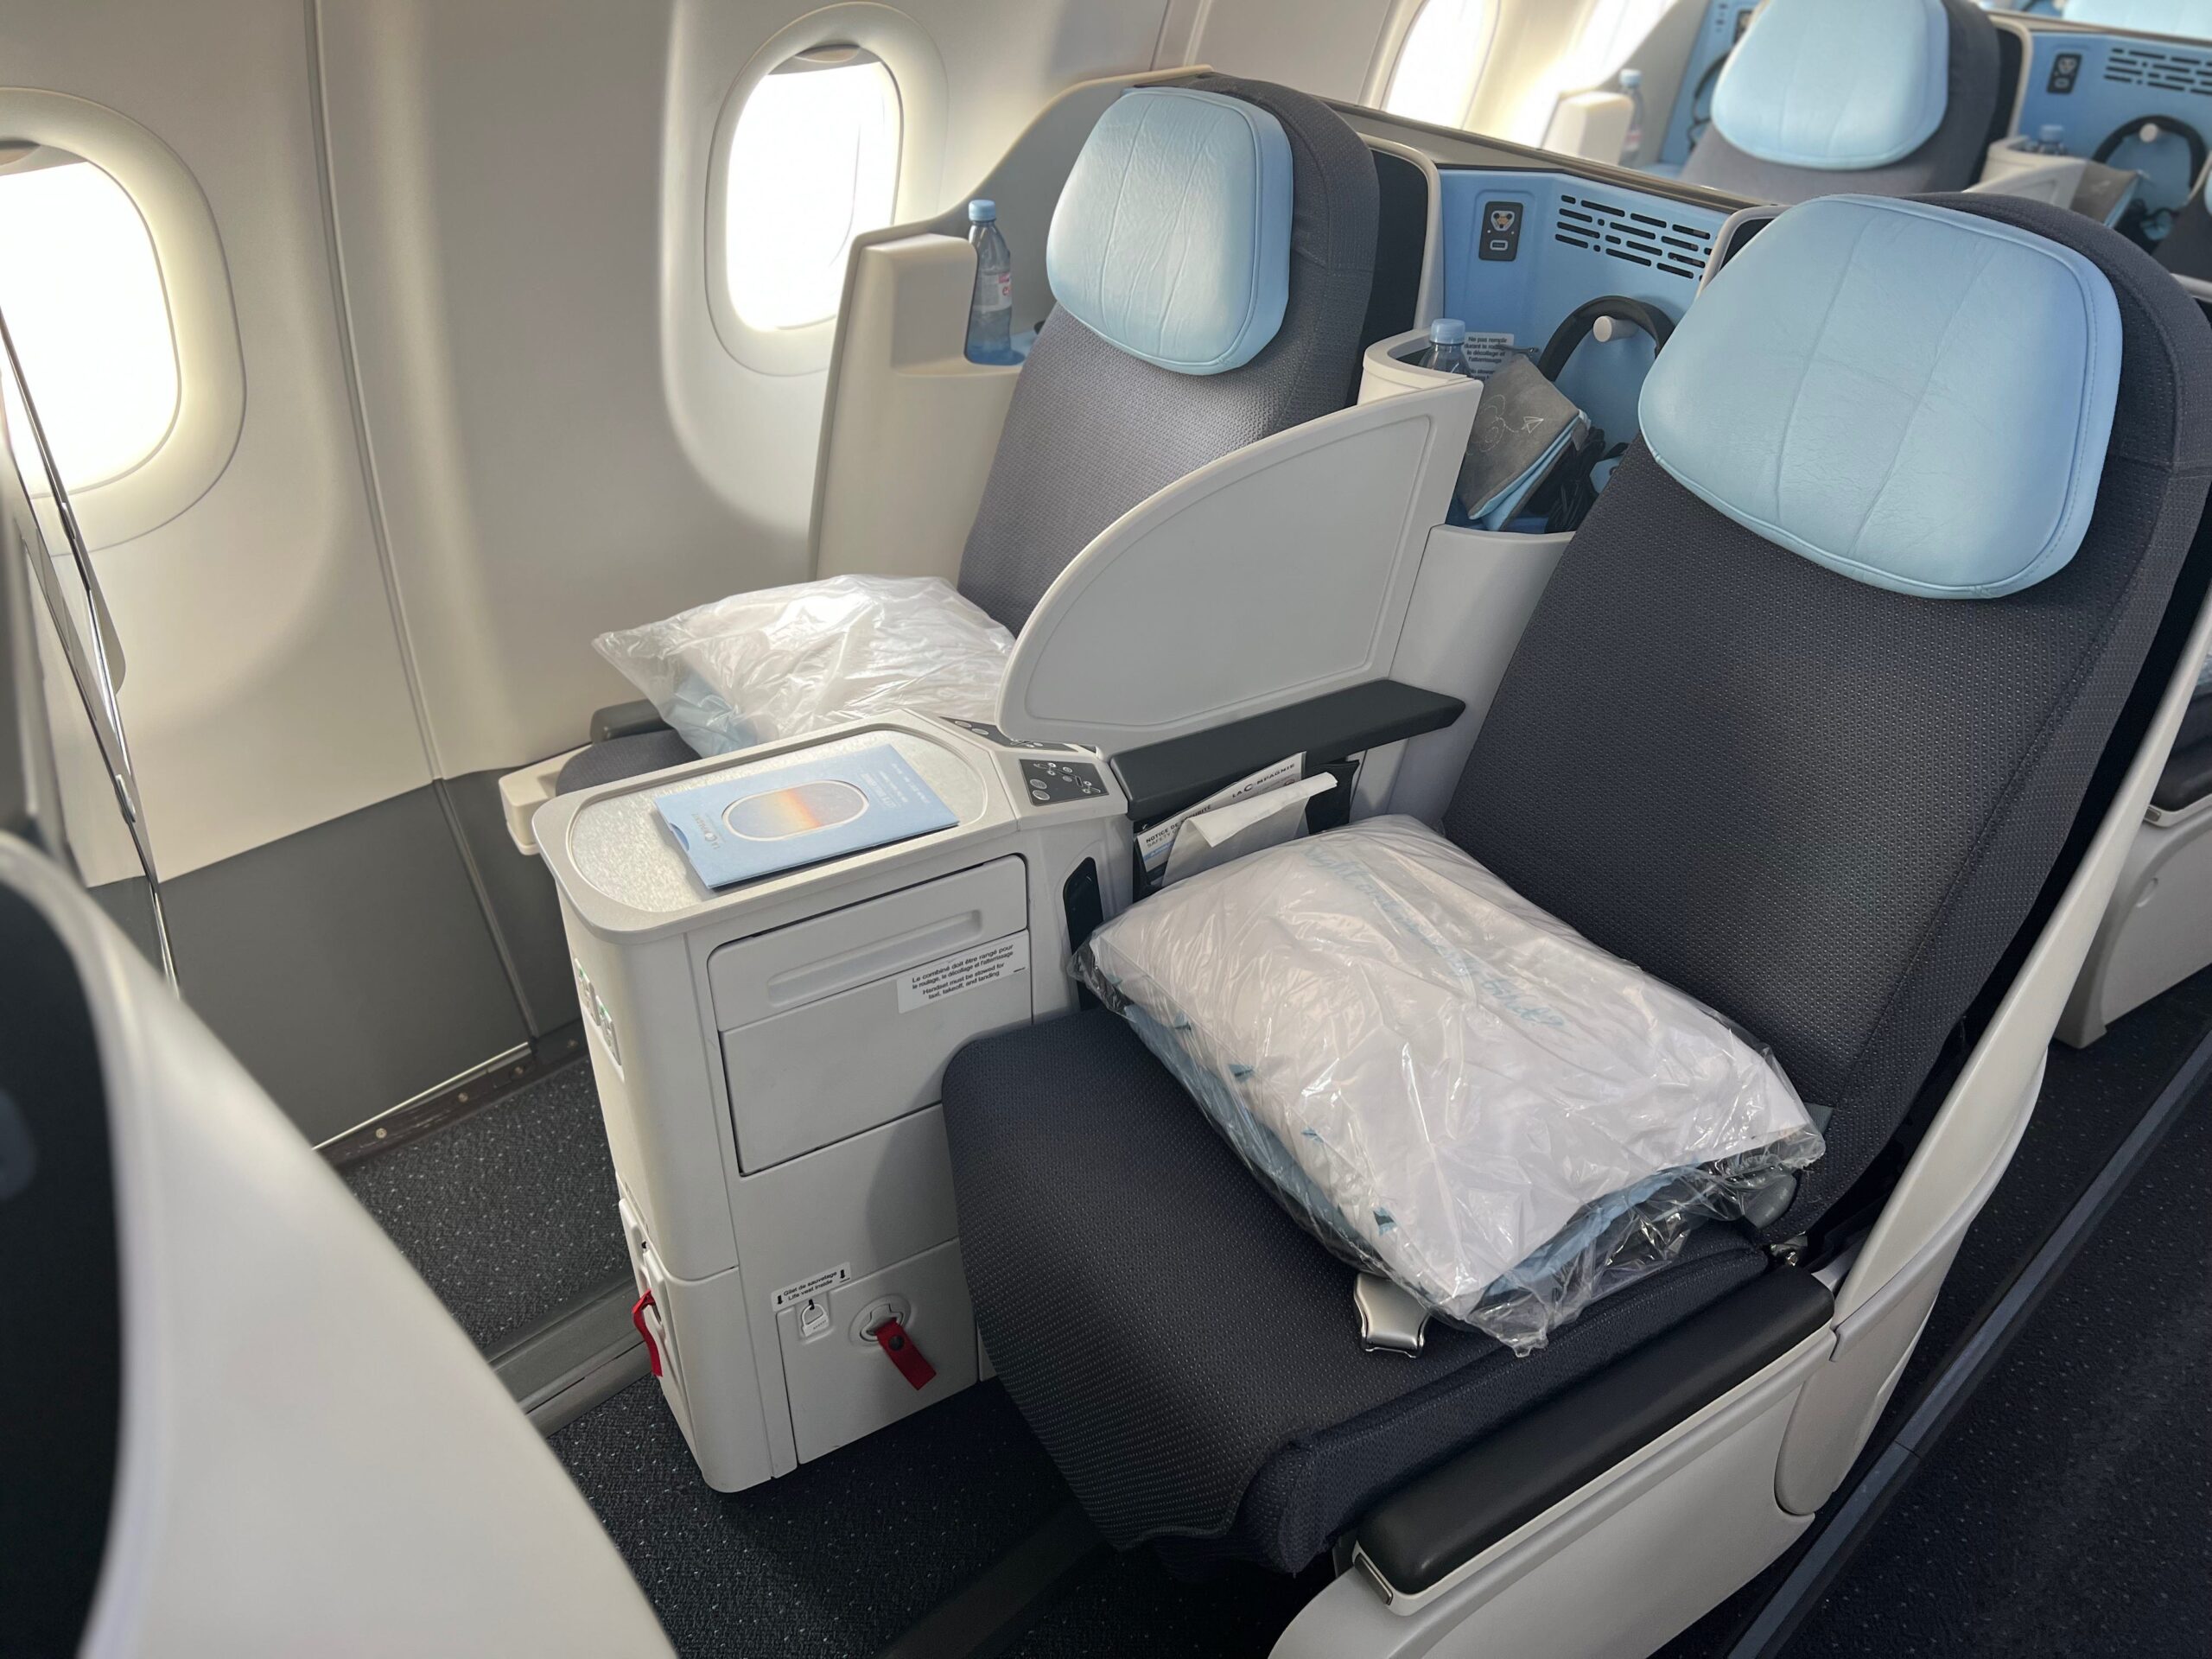 Flying on La Compagnie all-business class airline from Paris to New York &mdash; two loungers.